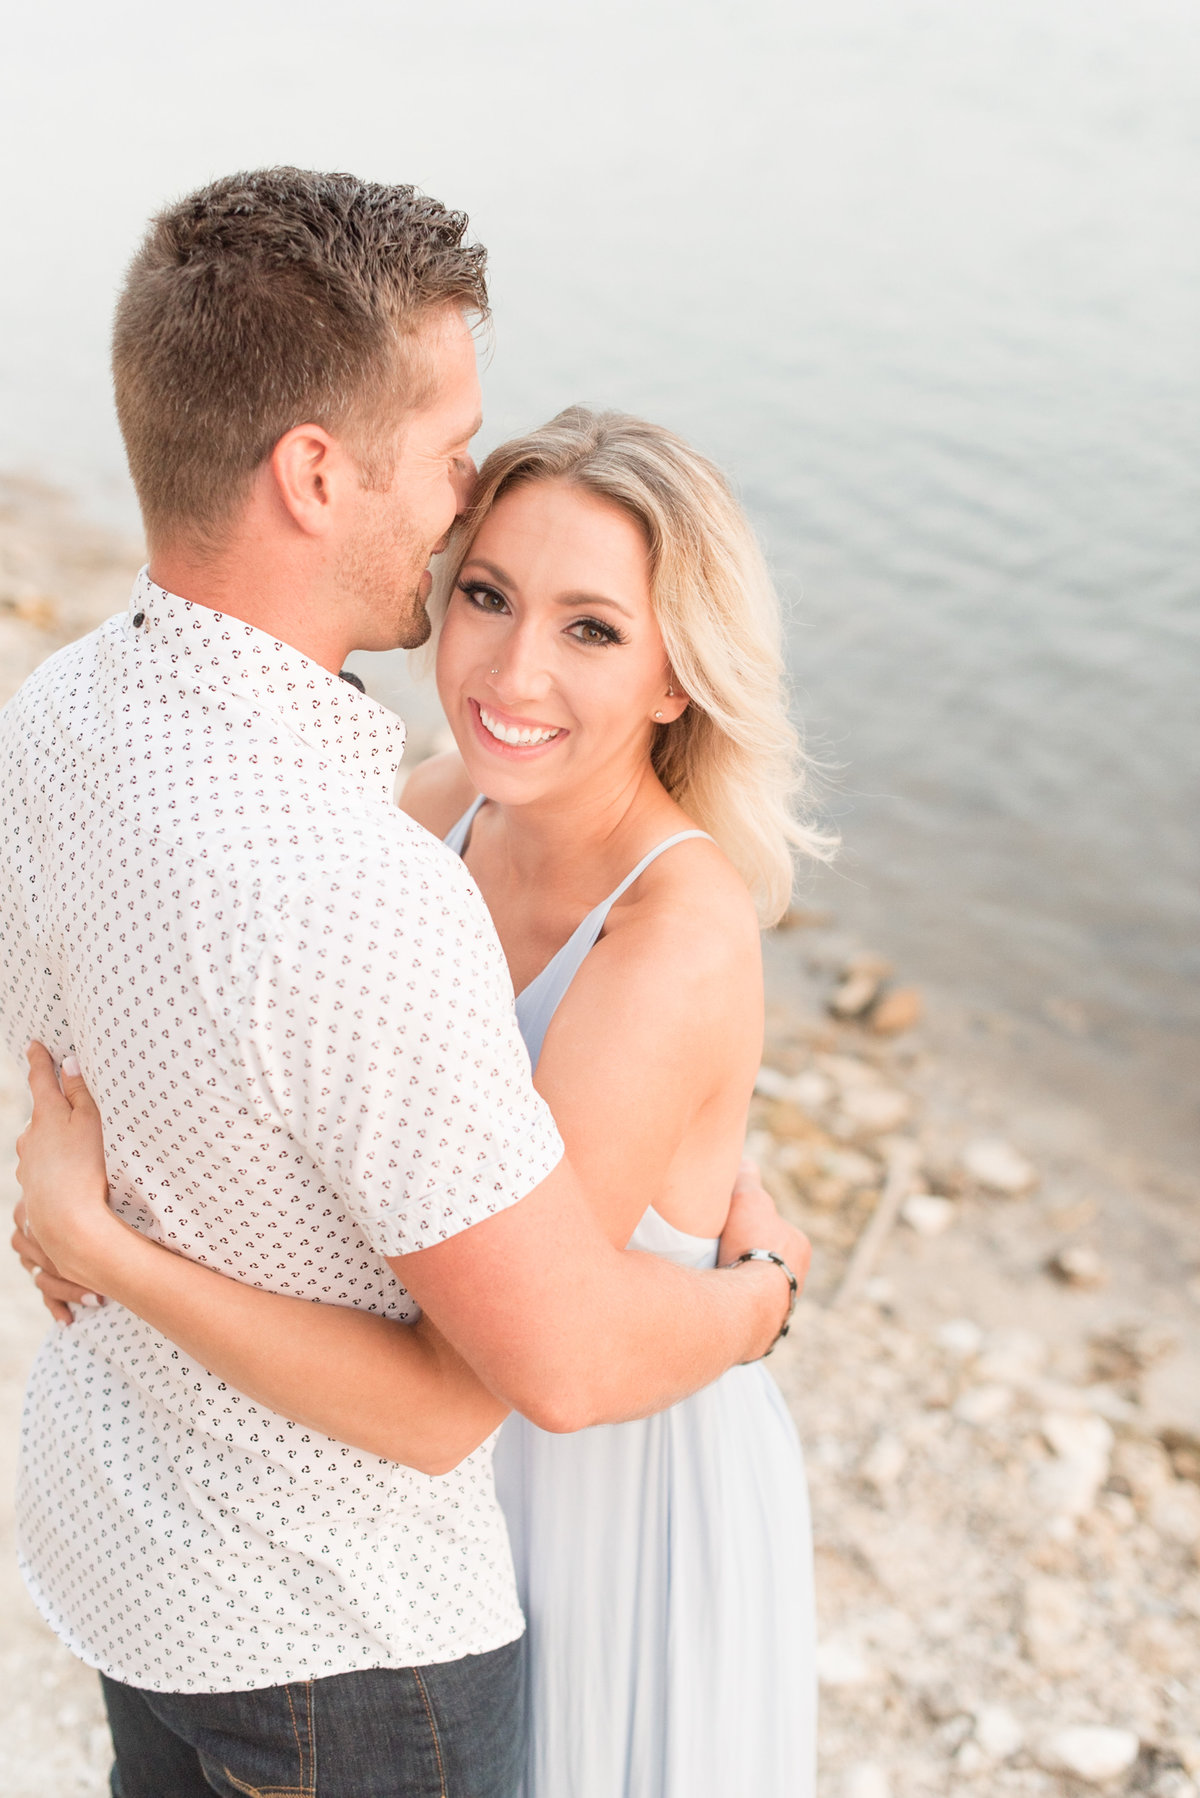 Engaged couple hugging as woman smiles and looks at camera beside edge of pond.